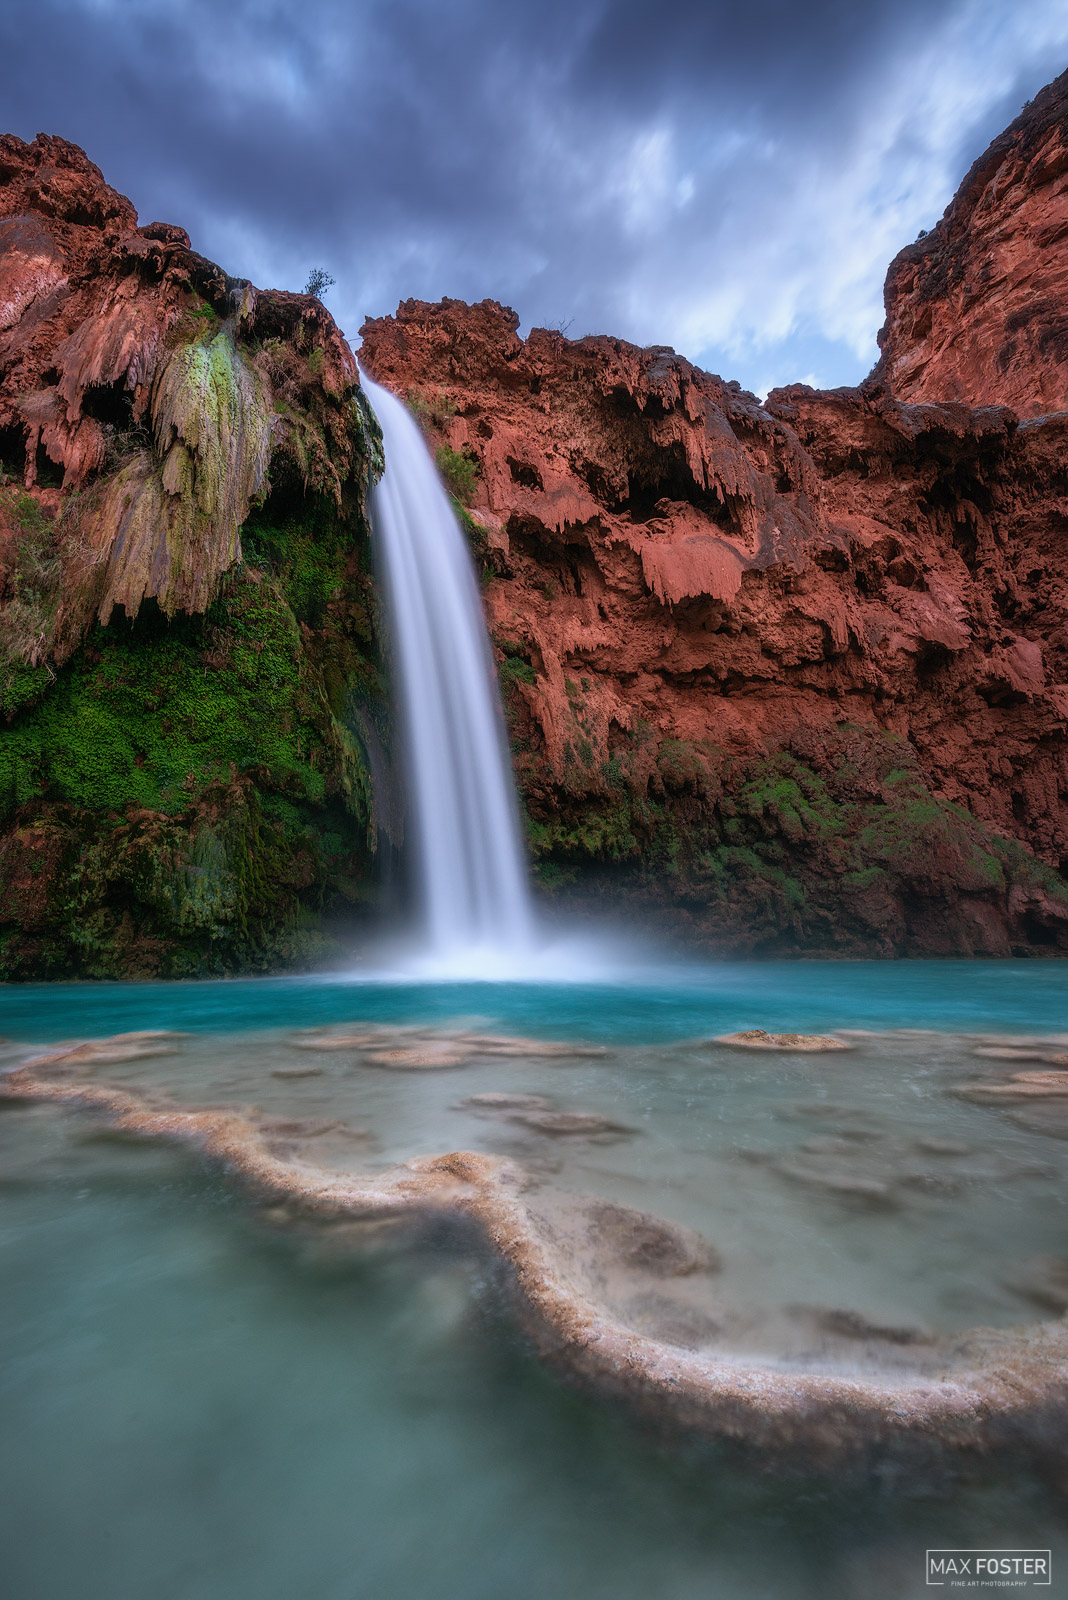 Add color to your walls with Shadows Of The Past, Max Foster's limited edition photography print of Havasu Falls from his Grand...